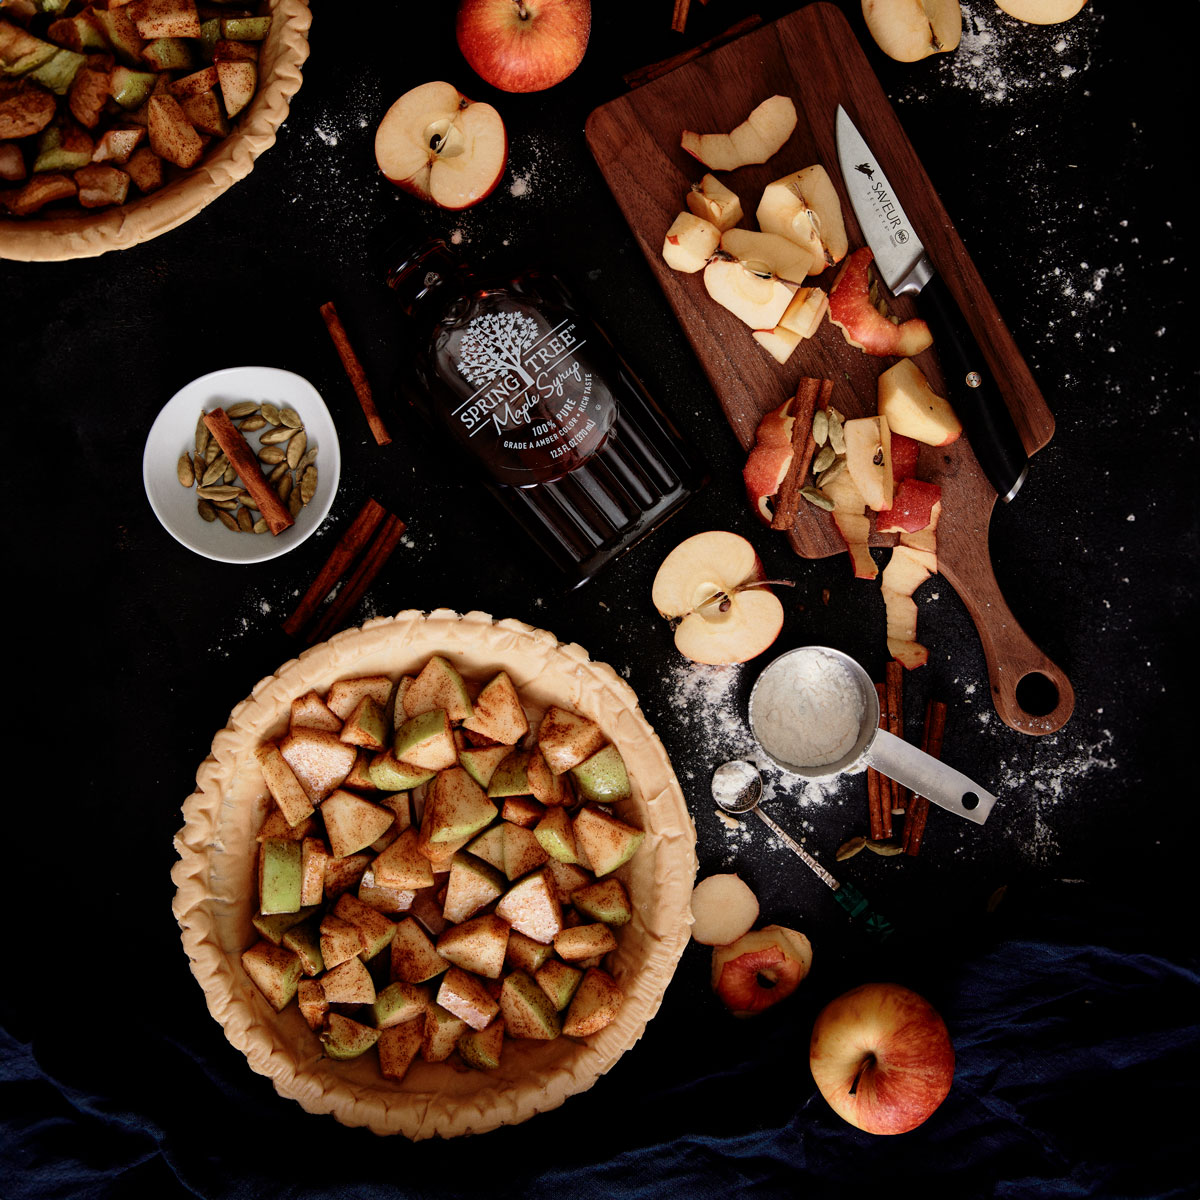 A top-down view of a baking scene featuring an unbaked apple pie filled with diced apples, a cutting board with apple slices and a knife, a bottle of maple syrup, whole and sliced apples, a small bowl with spices, and a scoop of flour, all scattered on a dark surface with hints of flour and a navy cloth.